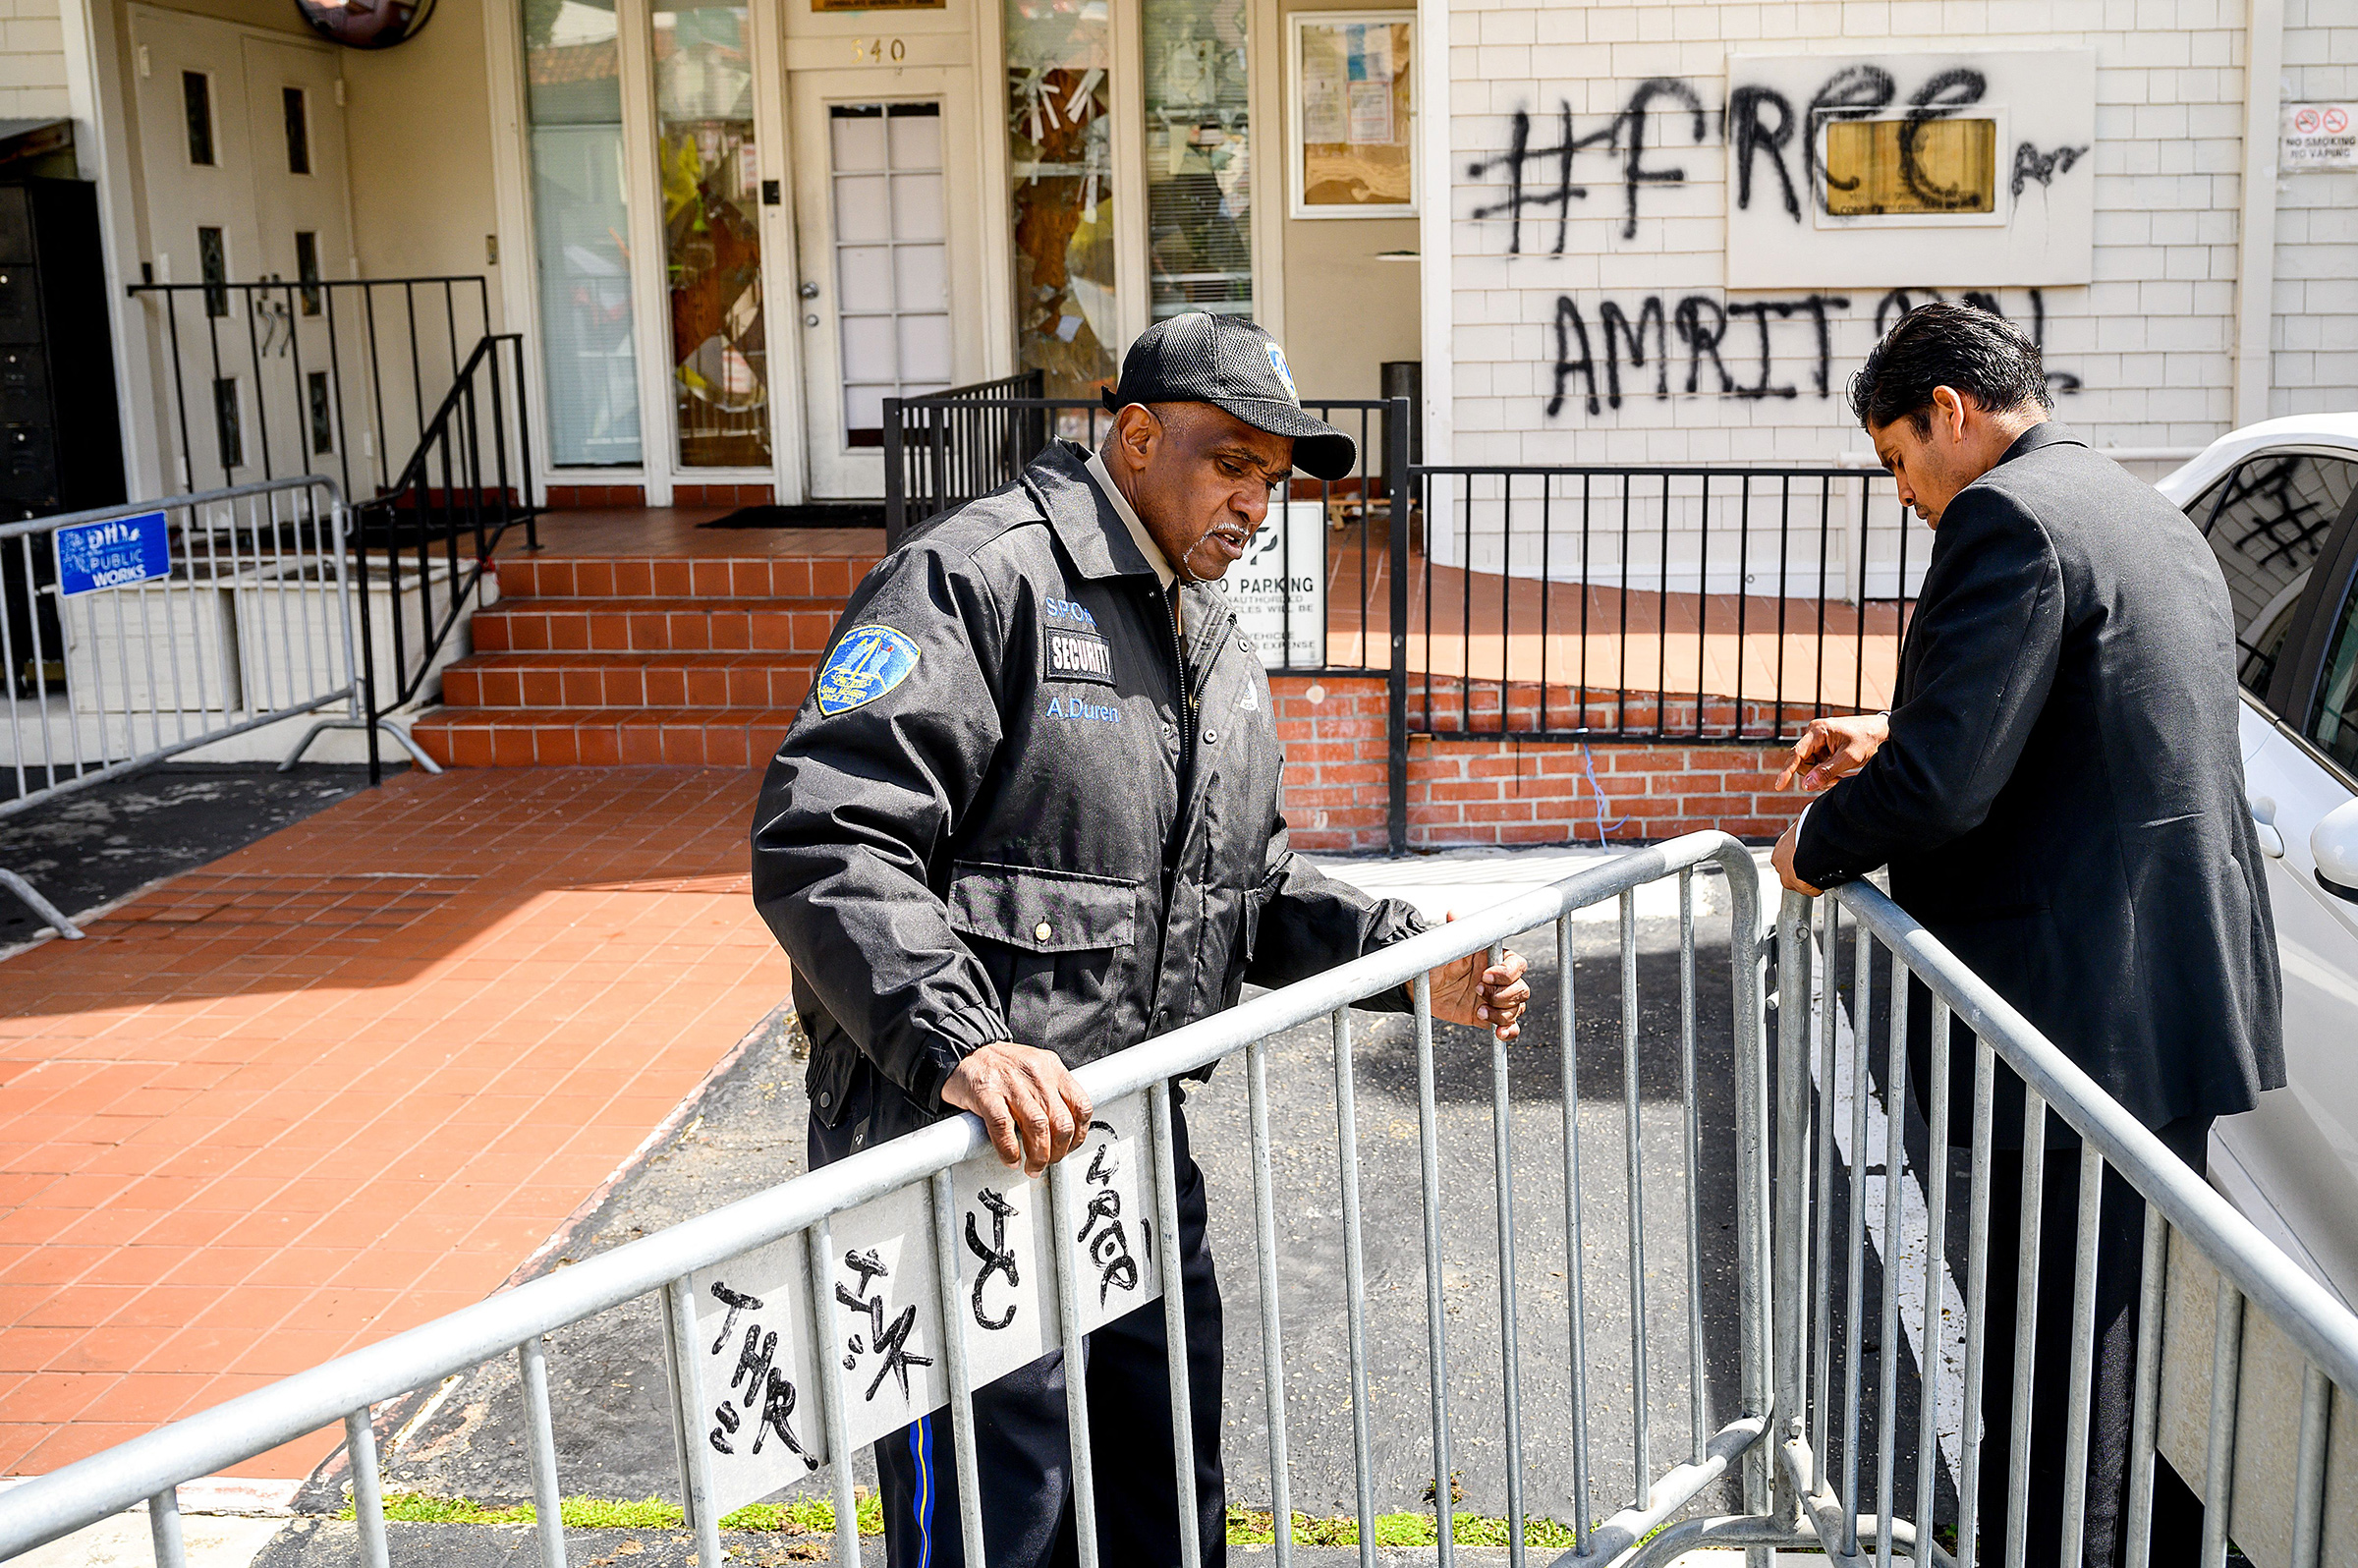 A security guard adjusts barricades at the Indian Consulate as broken windows and a graffitti reading "FreeAmritpal" are seen behind, in San Francisco, Calif. on March 20. Indian authorities extended a mobile internet blackout across a state of about 30 million people on Monday as police hunted a radical Sikh preacher. The blackout extension came after supporters of Amritpal Singh were filmed vandalising India's consulate in San Francisco. (Noah Berger—AFP/Getty Images)